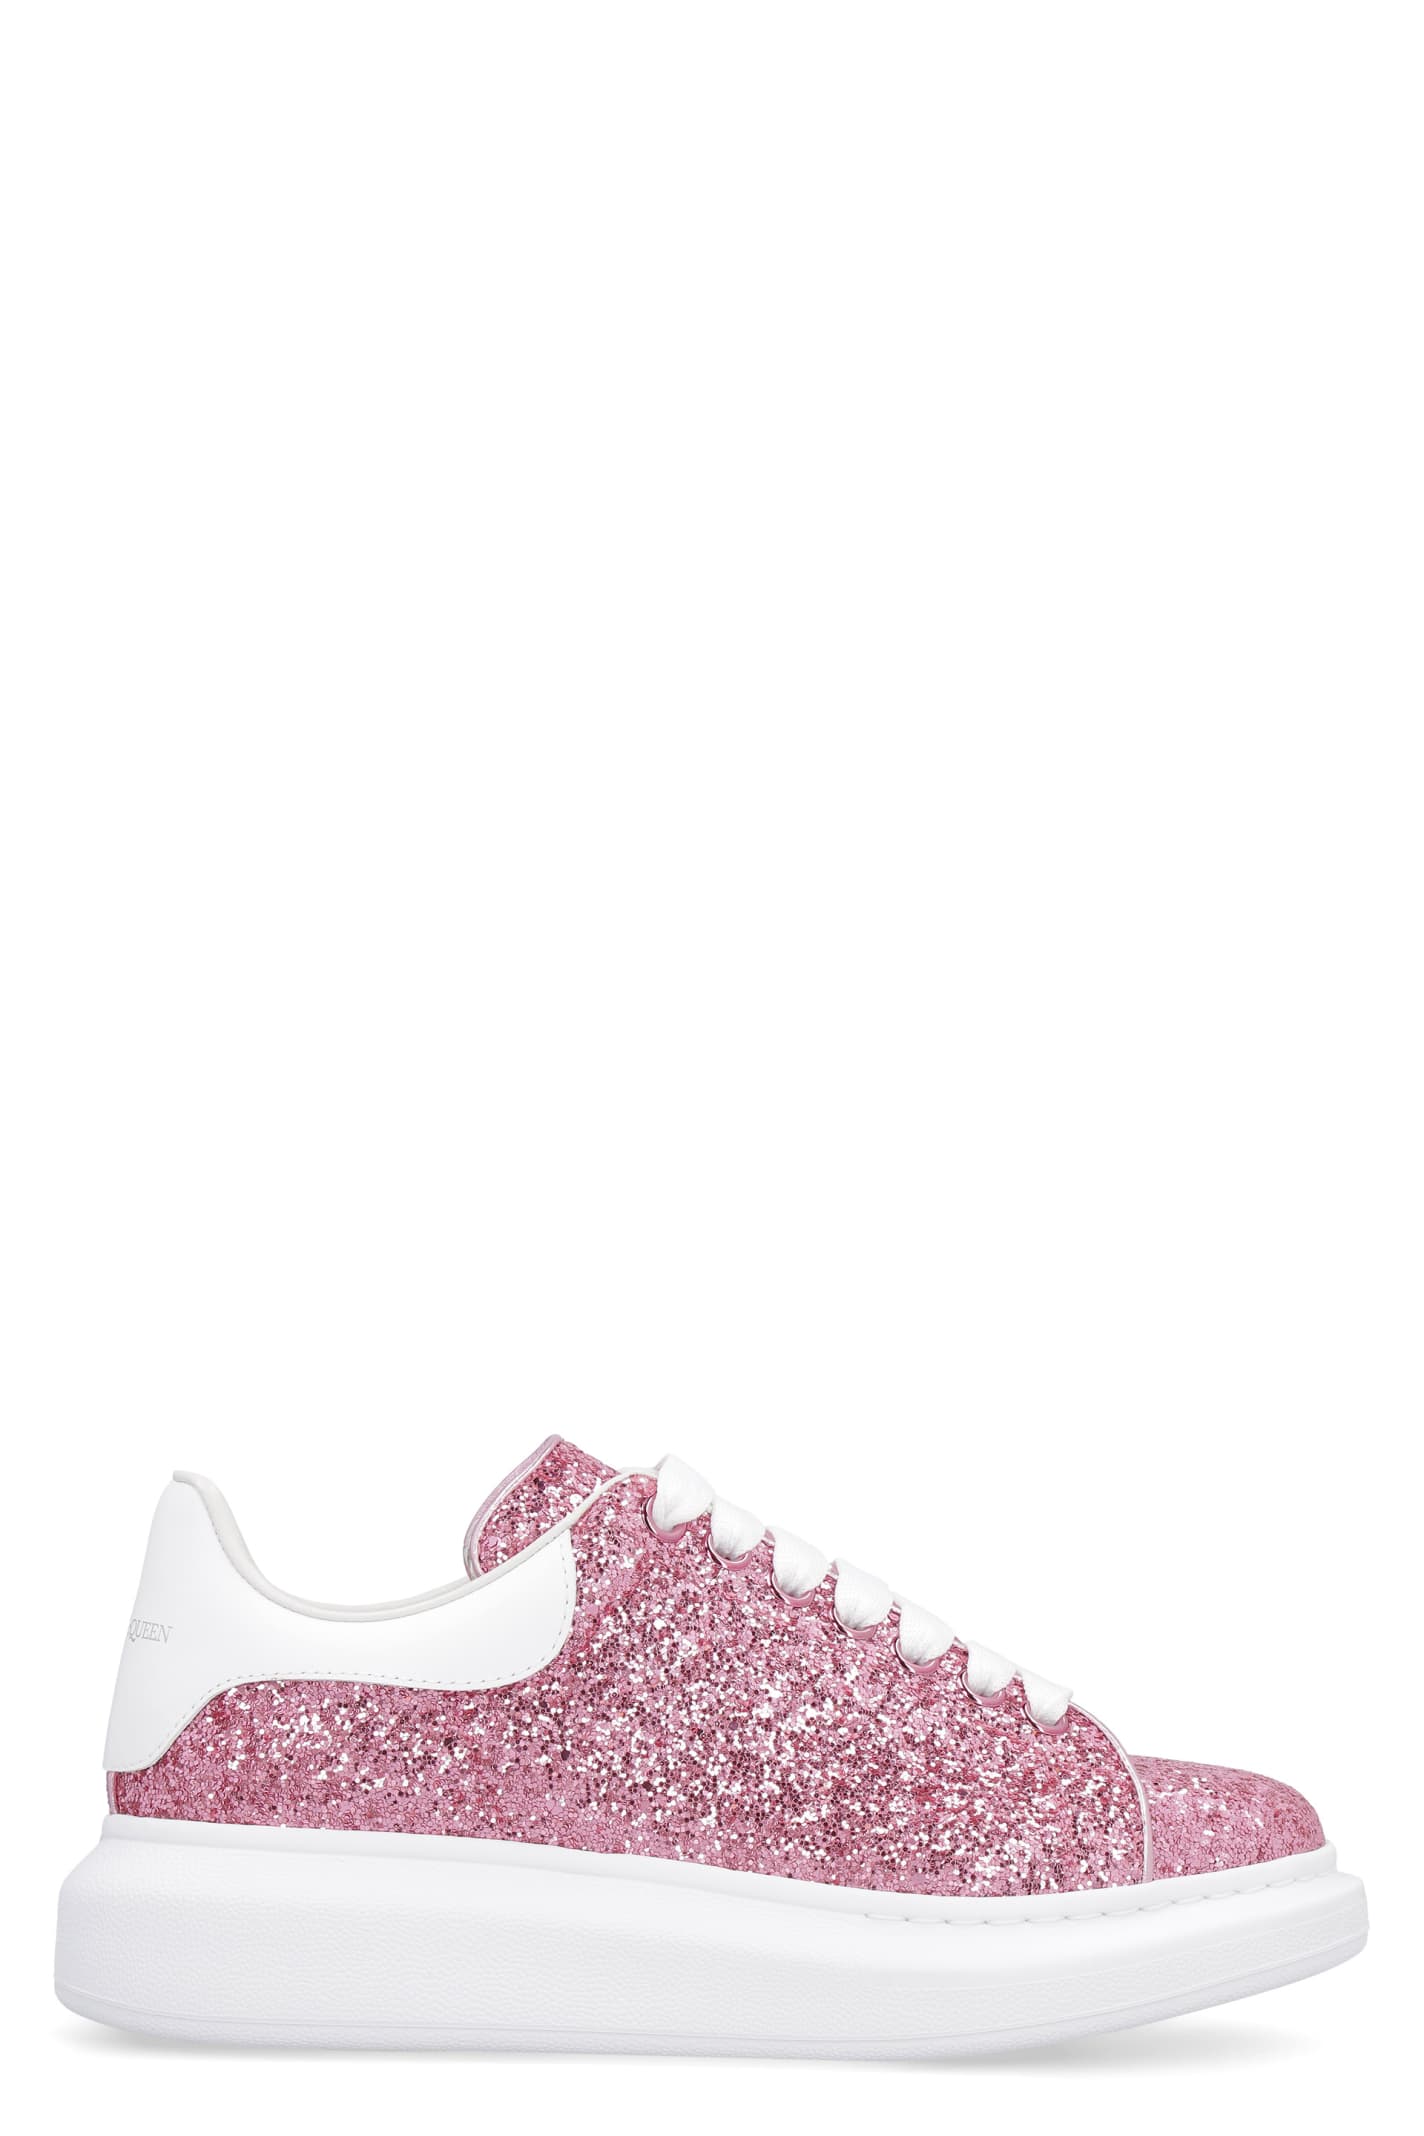 Buy Alexander McQueen Larry Glitter Chunky Sneakers online, shop Alexander McQueen shoes with free shipping